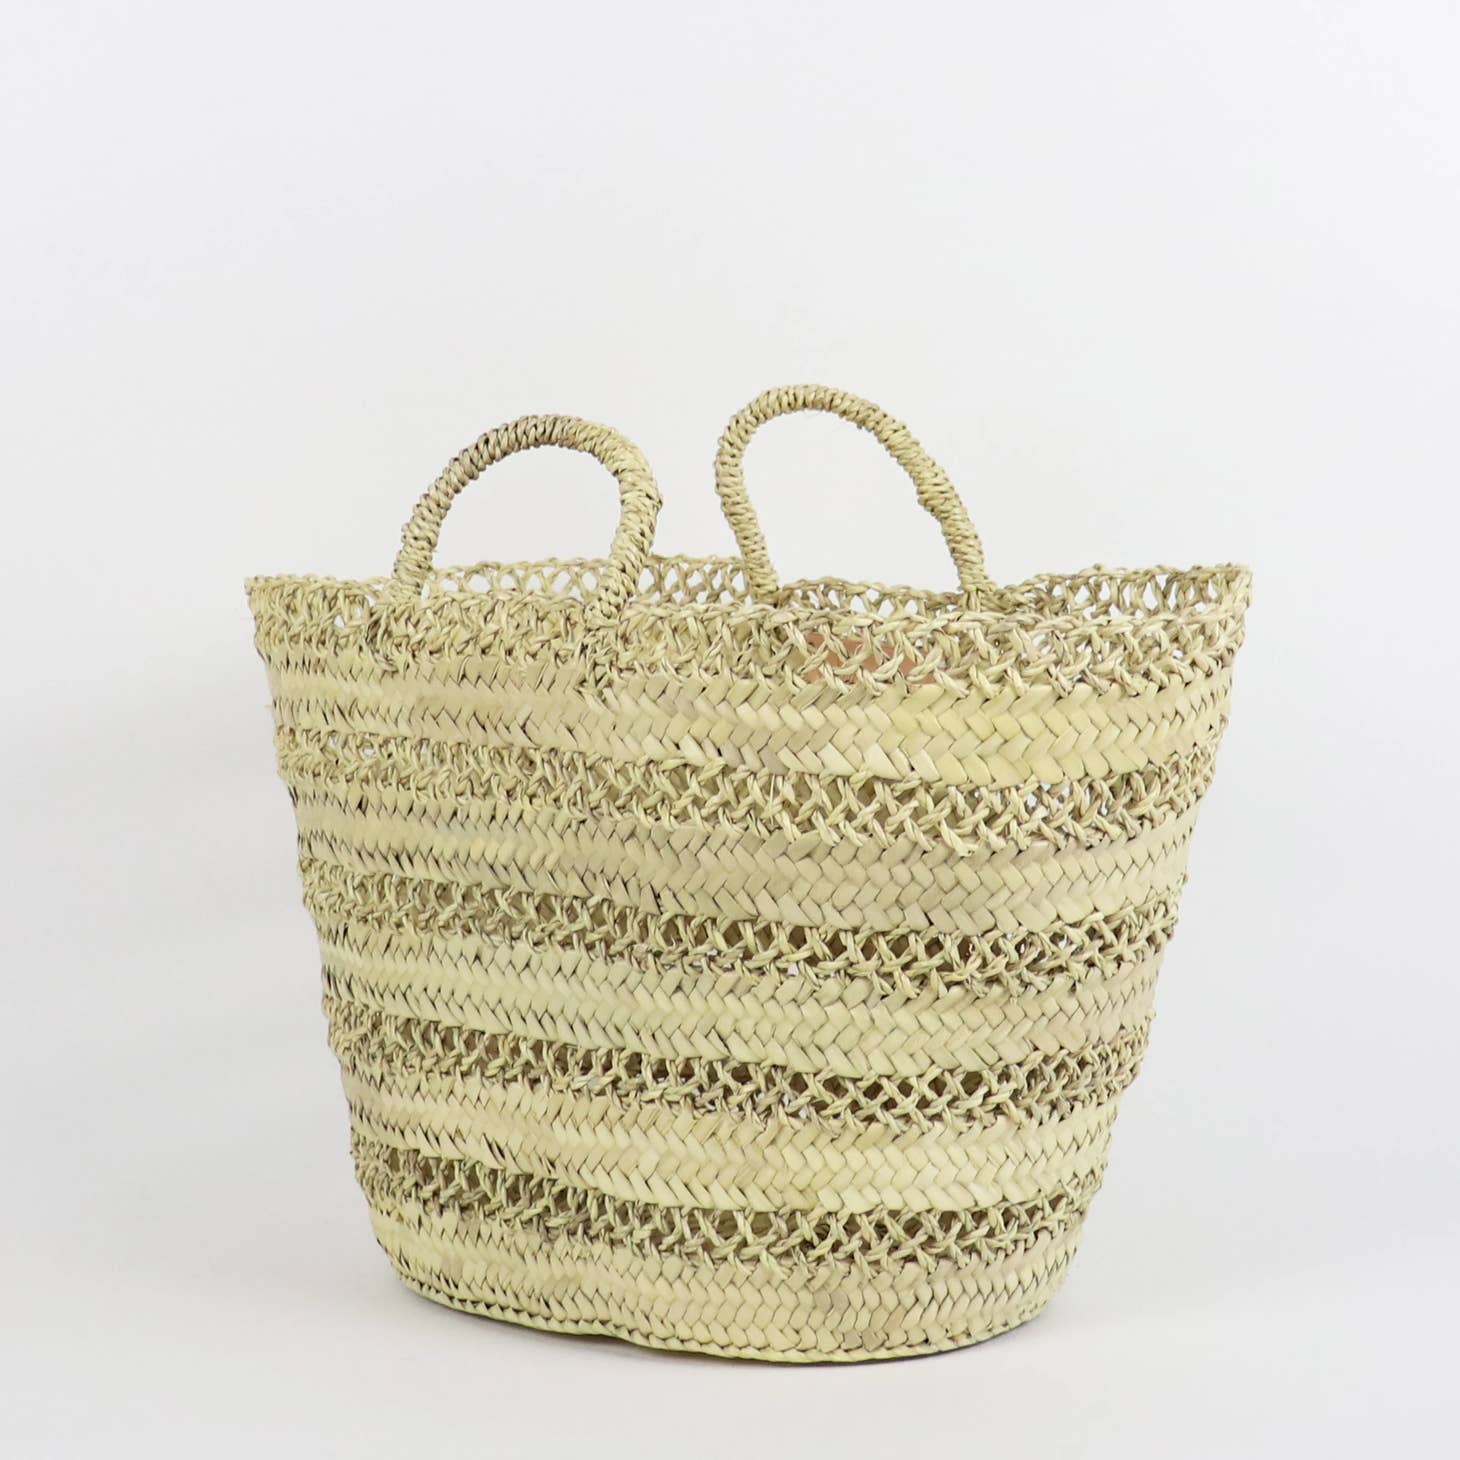 No matter where you sport this bag, you're bound to get compliments. From its gorgeous open weave design to its twisted palm leaf rope handles, the Cannes Basket scores points for being sustainable, ethical, and handmade. Ethically handmade in Morocco.